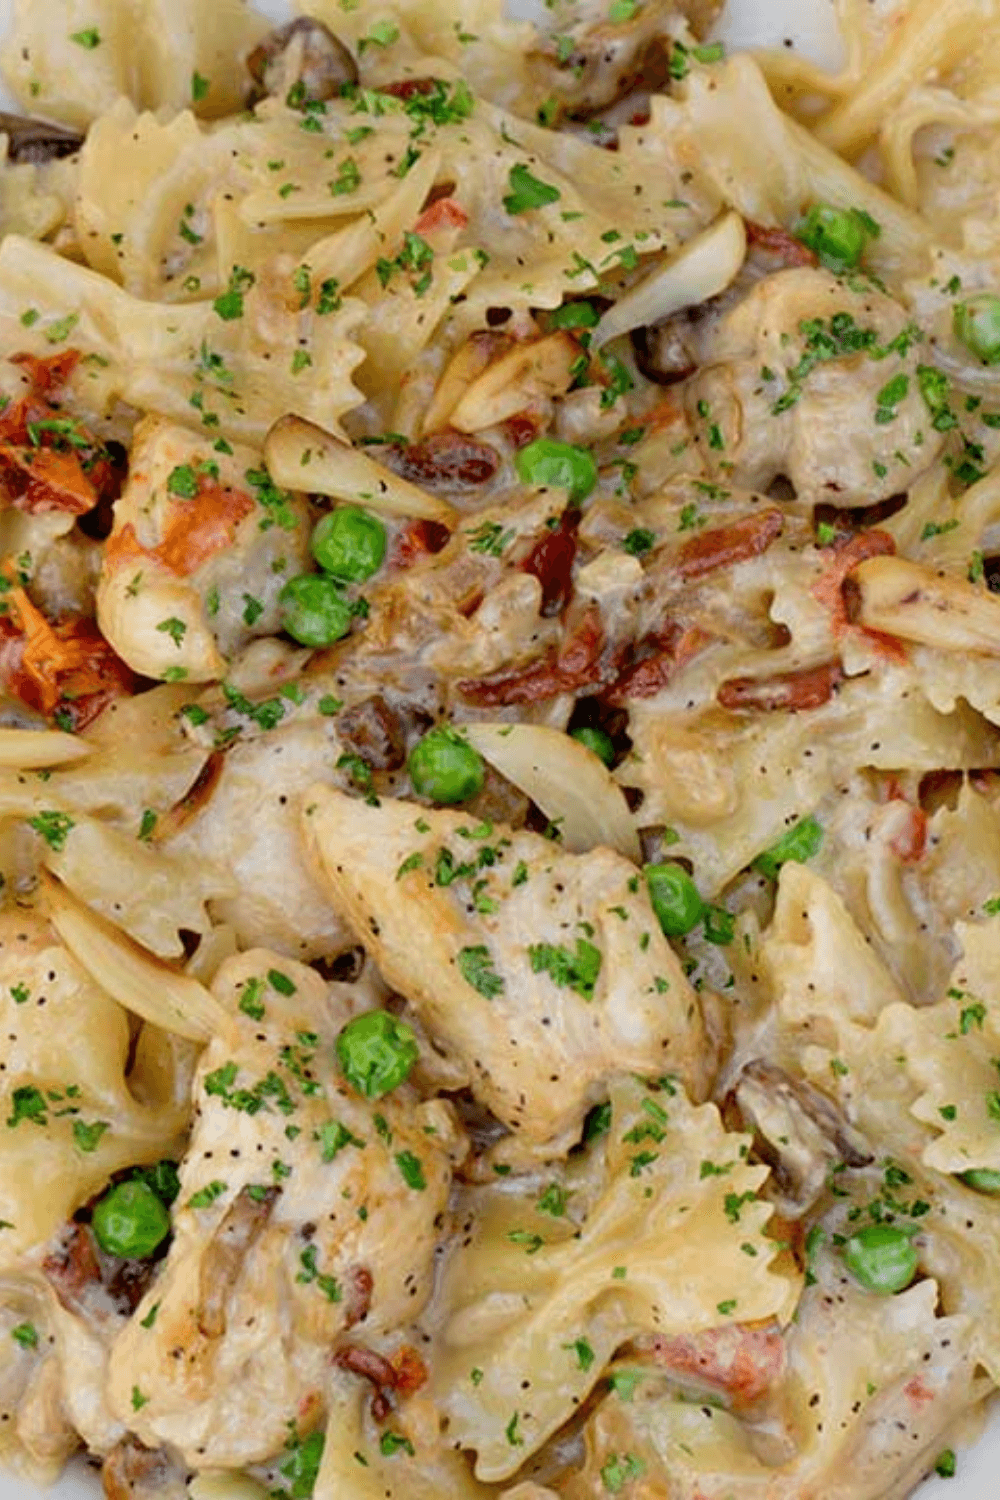 Cheesecake Factory's Farfalle With Chicken and Roasted Garlic